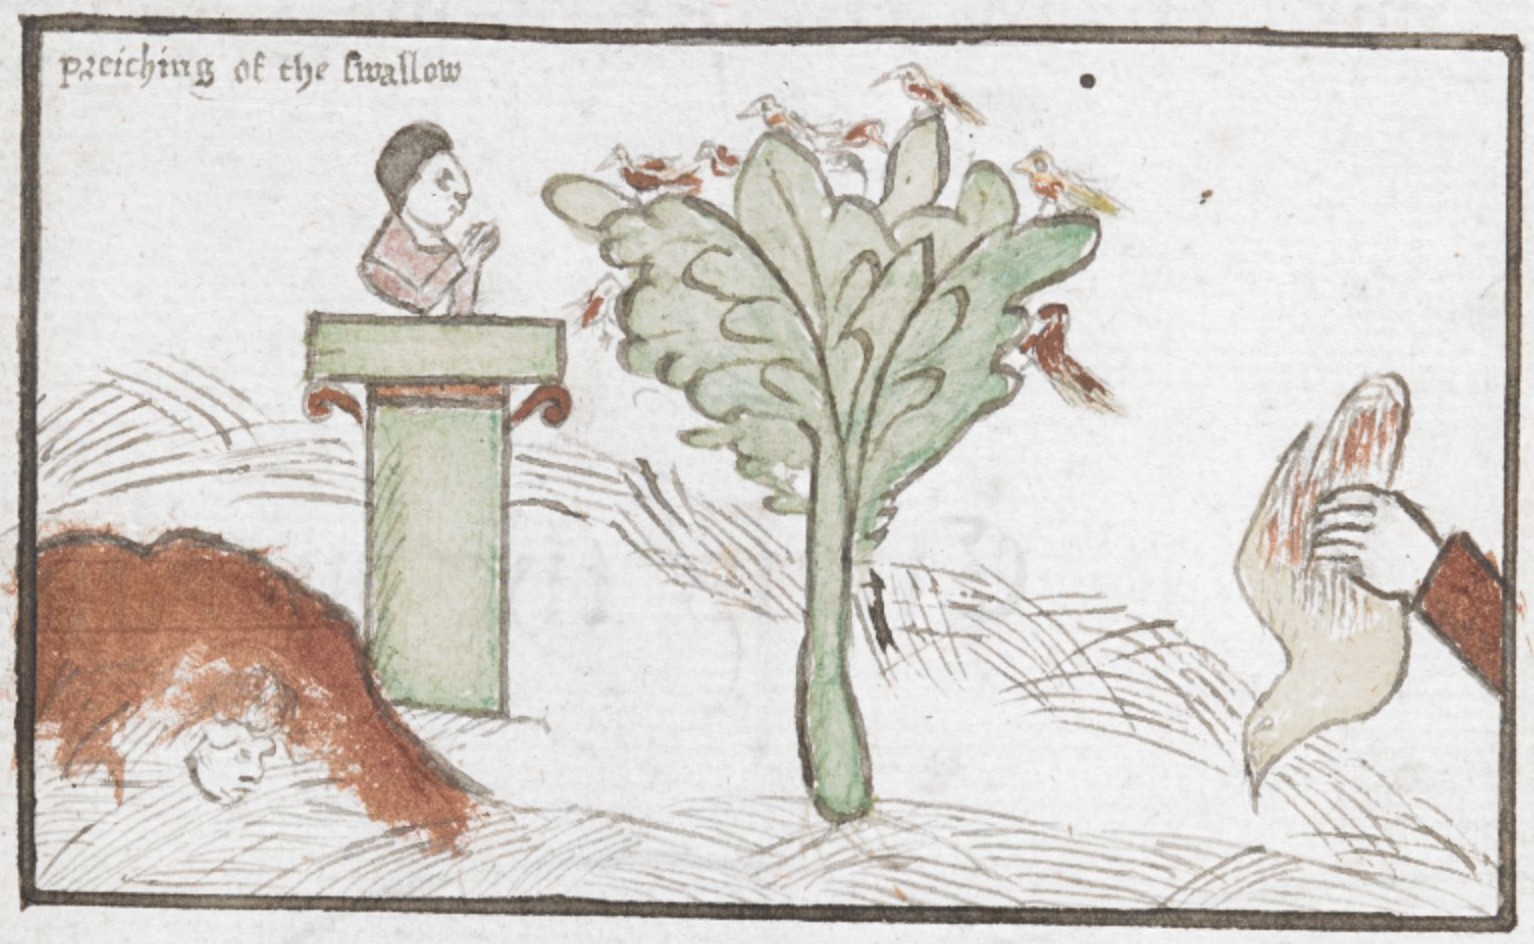 Image of a man on a pedestal, birds atop a tree, and a hand holding a
                     bird.